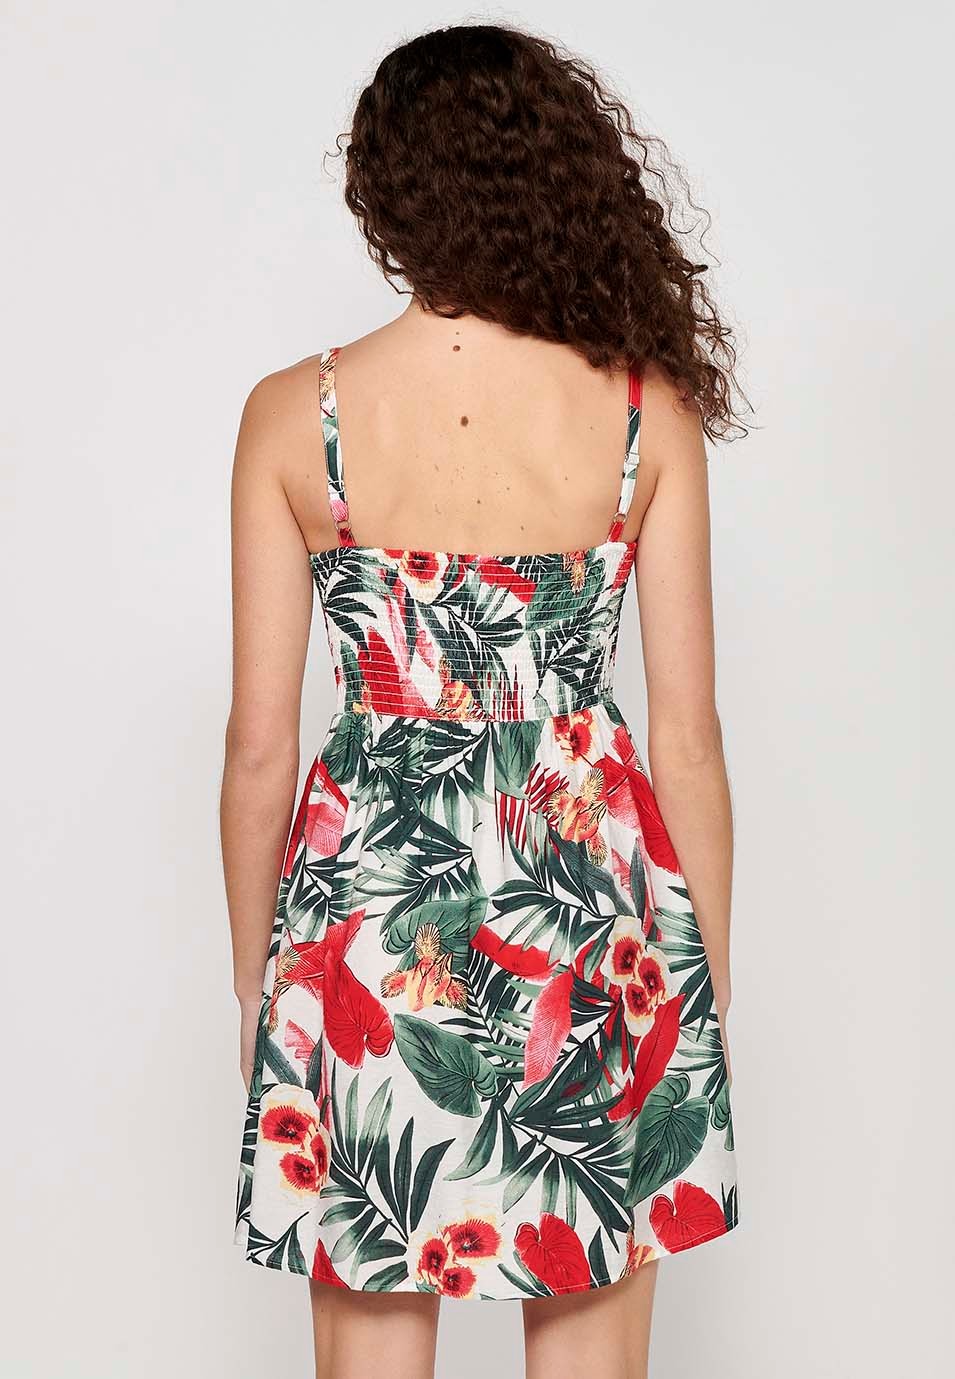 Women's Tropical Floral Print V-Neck Button Front Strap Dress with Rubberized Back Multicolor 5